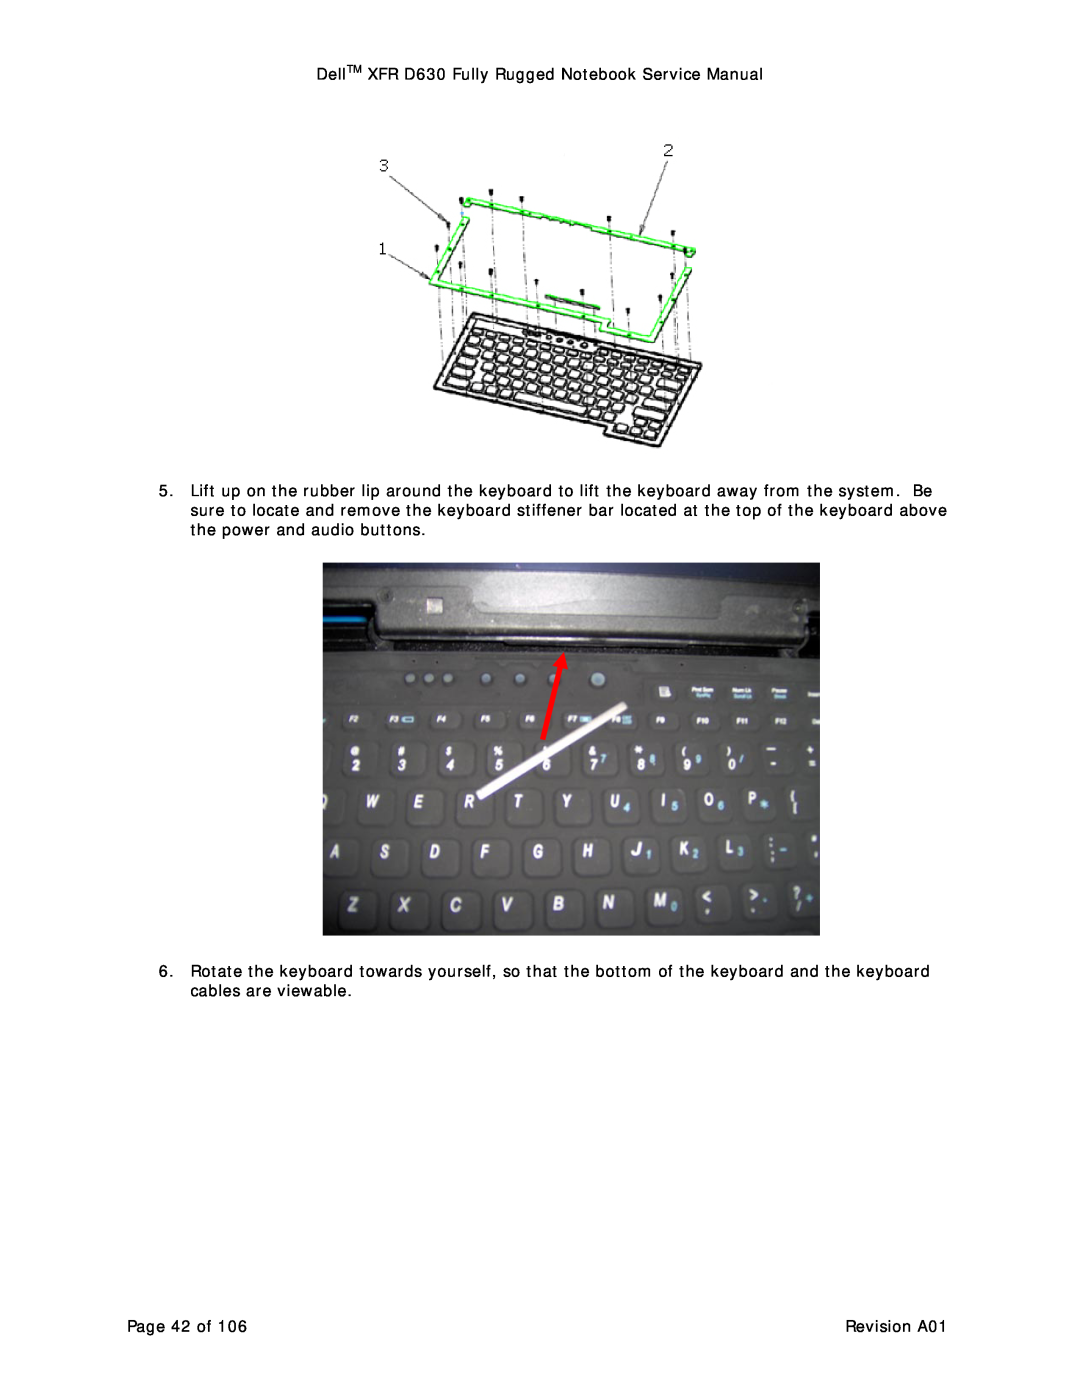 Dell service manual DellTM XFR D630 Fully Rugged Notebook Service Manual 